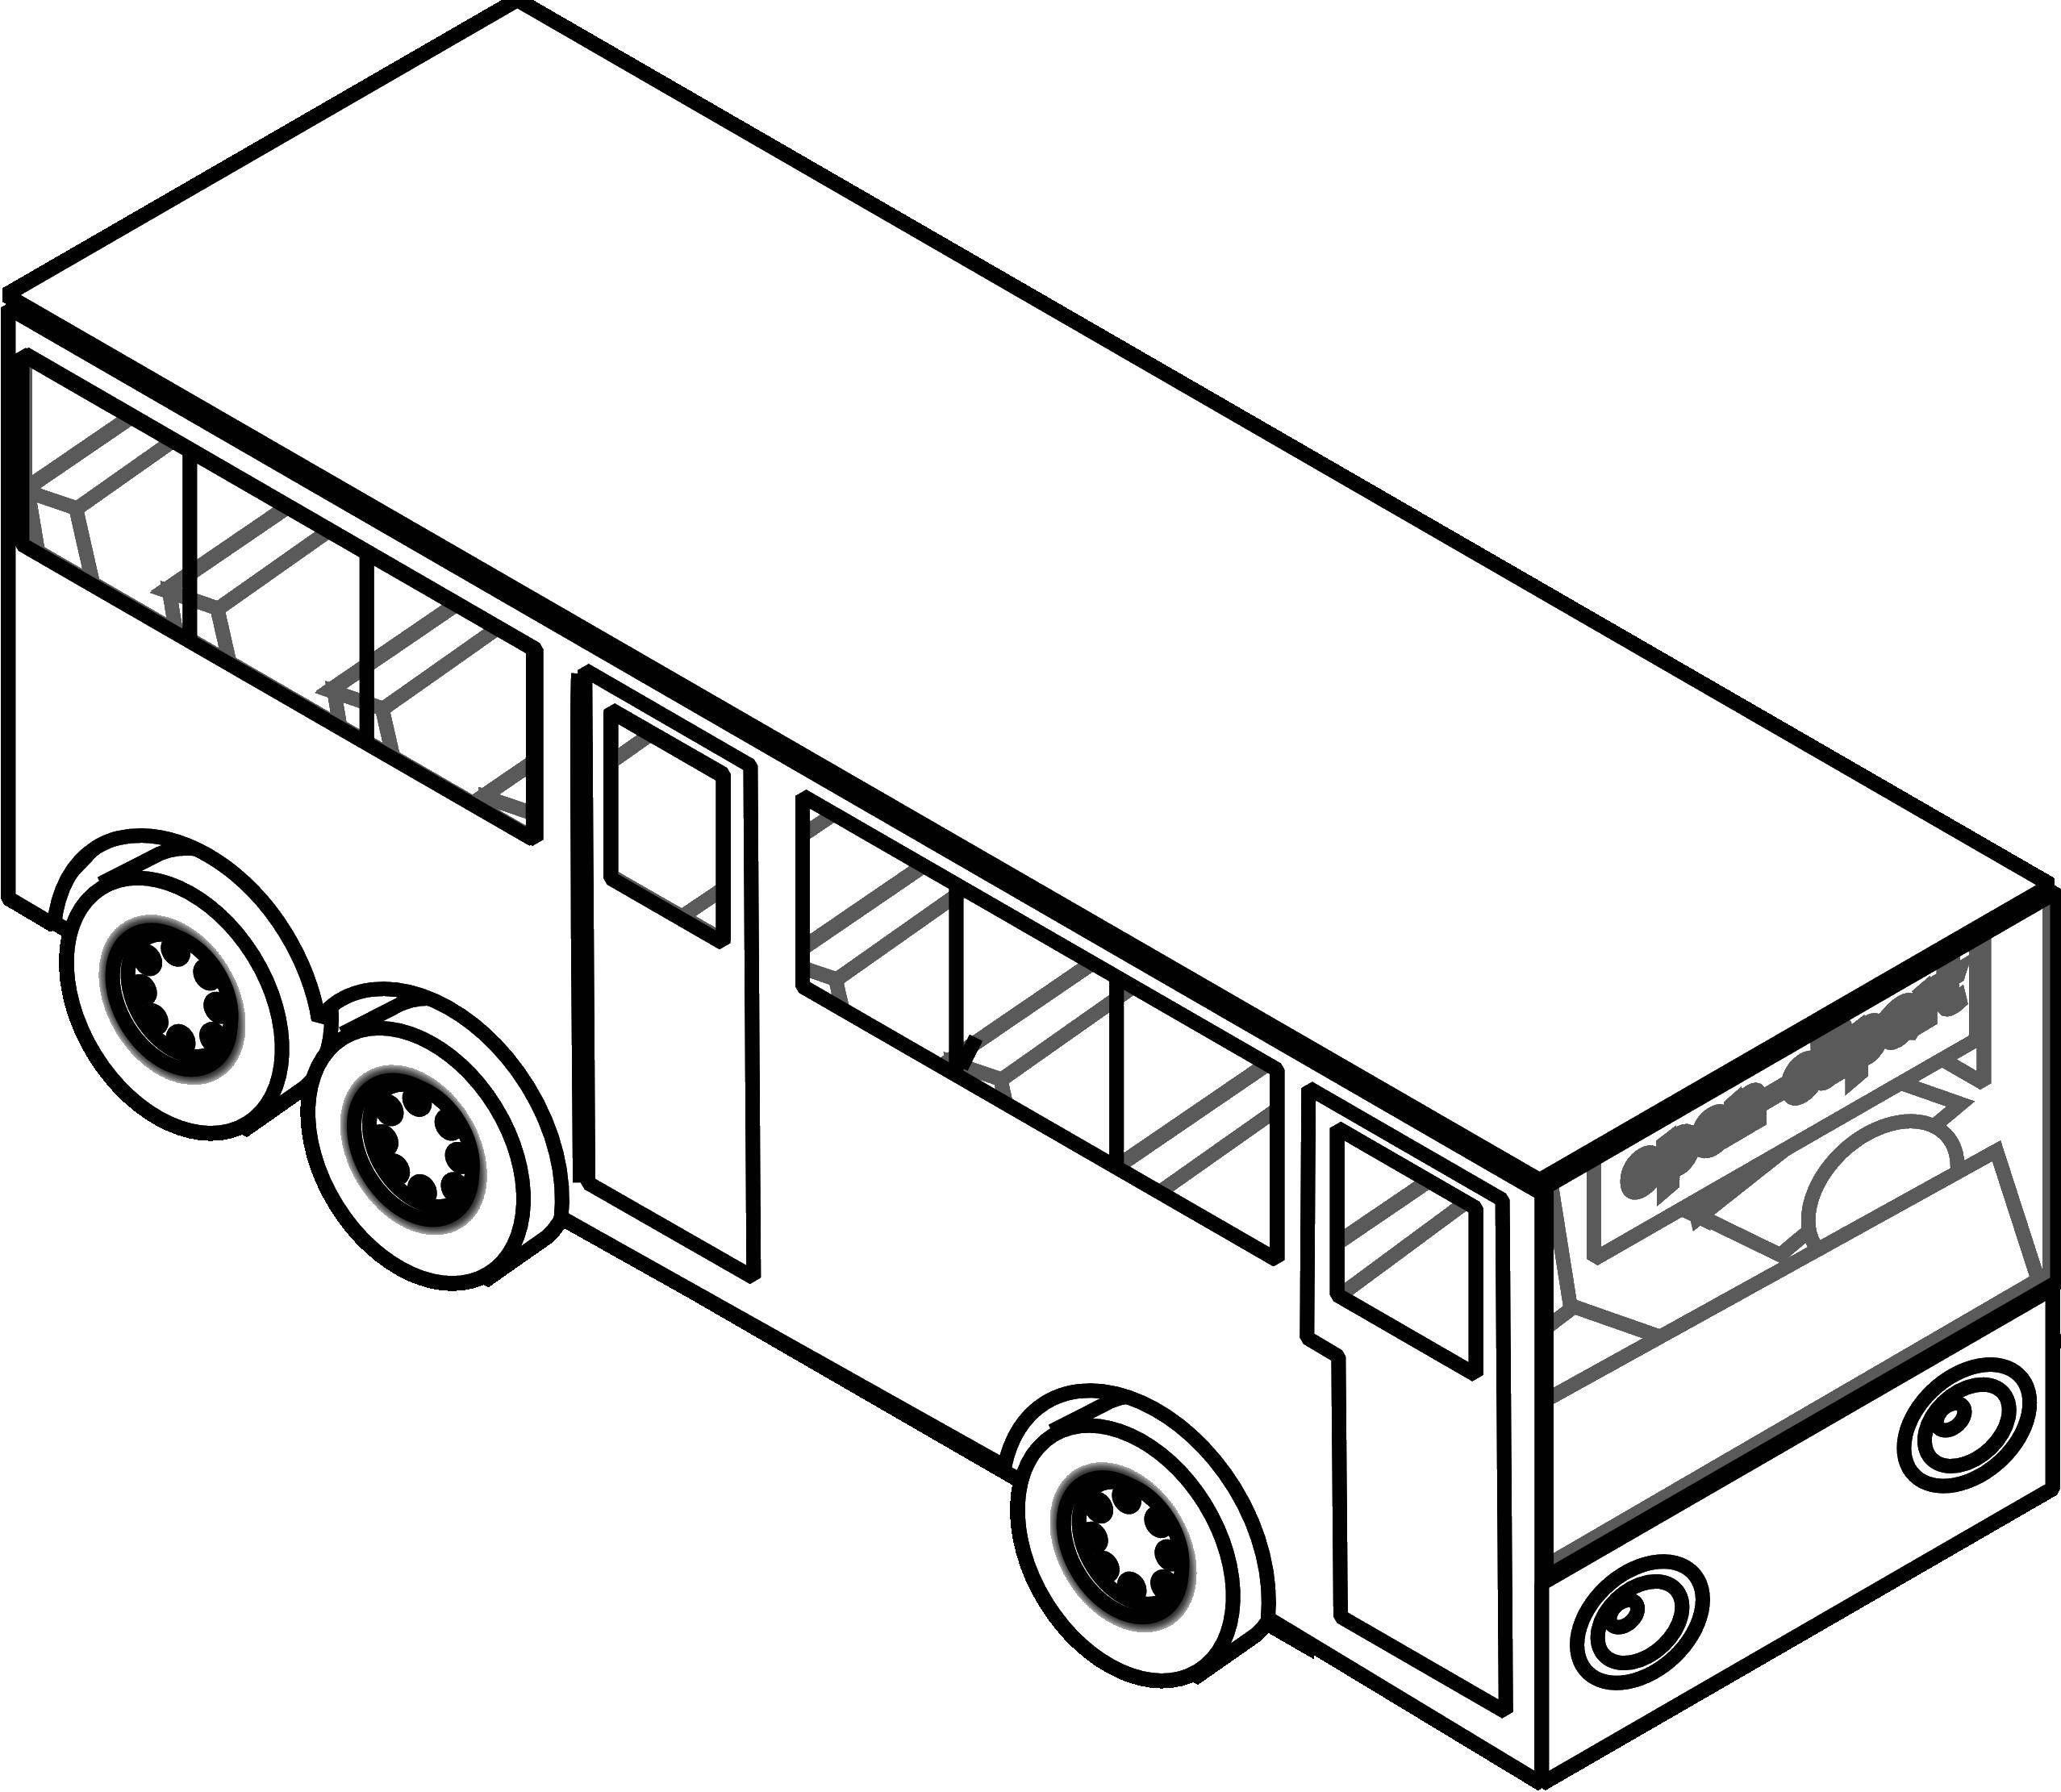 Coloring Bus. Category transportation. Tags:  public transport, buses.